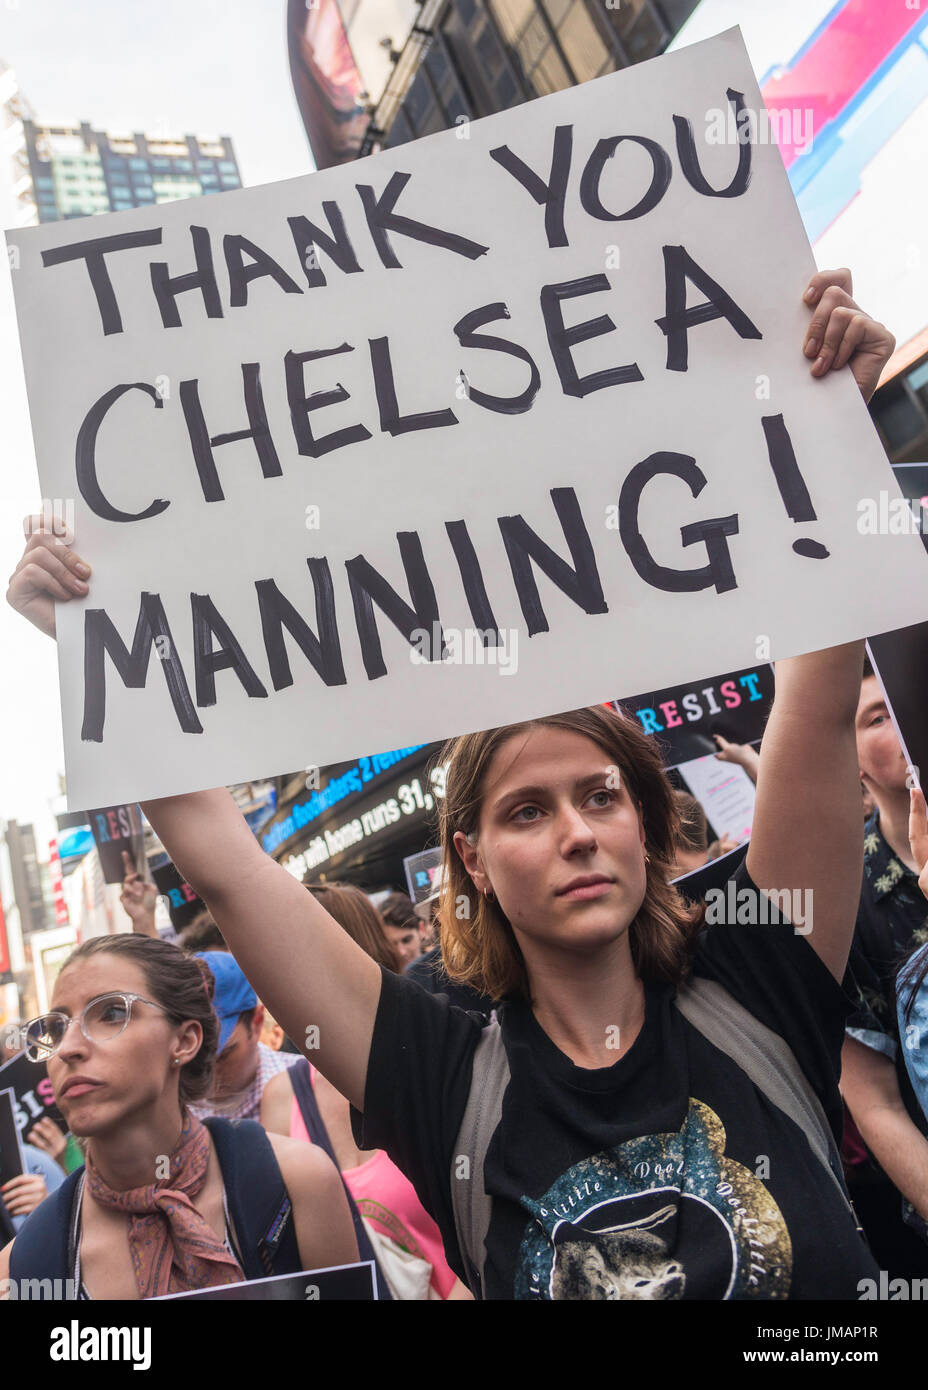 New York, NY 26 July 2017 In response to President Donald Trump's tweet to ban transgender people from the military, advocates, activists, and allies converged on the Military Recruitment Center in Times Square in protest. ©Stacy Walsh Rosenstock/Alamy Live News Stock Photo